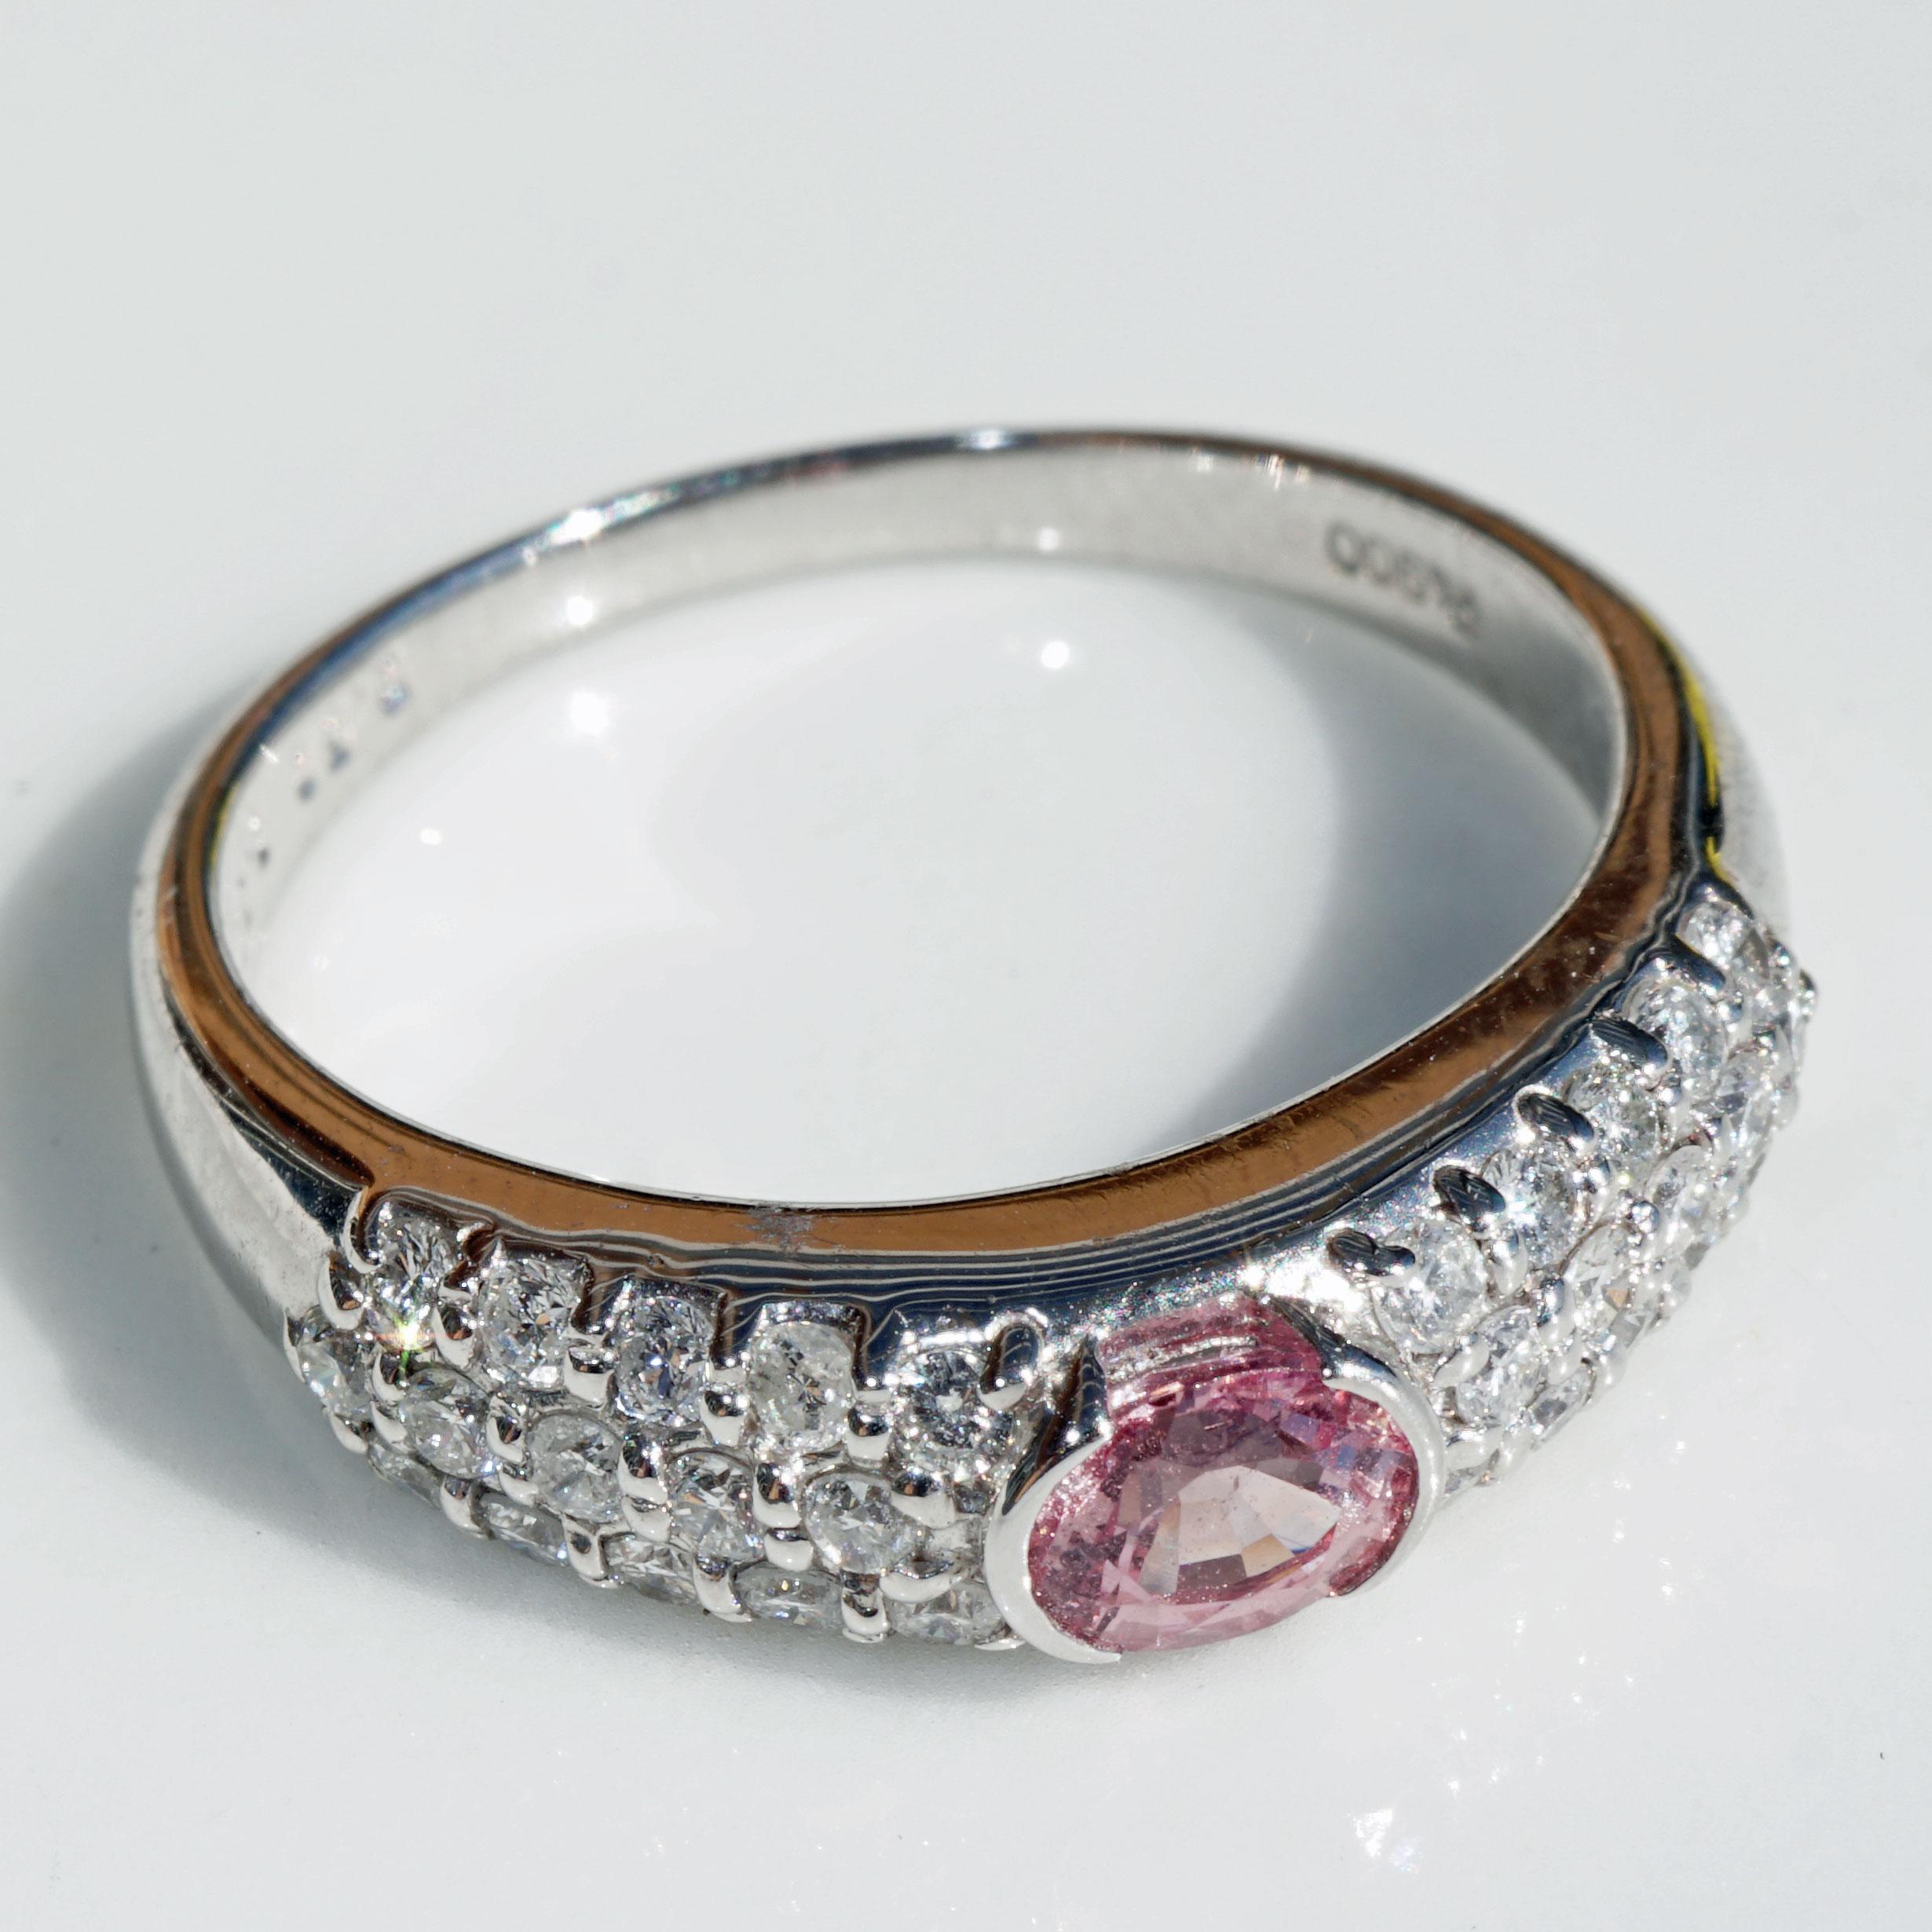 this great platinum ring is very noble worked, an oval facetted pink sapphire of approx. 0.51 ct, 6 x 4 mm, AAA+, great brilliance and in the ring shoulders pavee set full cut diamonds total approx. 0.50 ct, TW (fine white) / SI1-2 (small